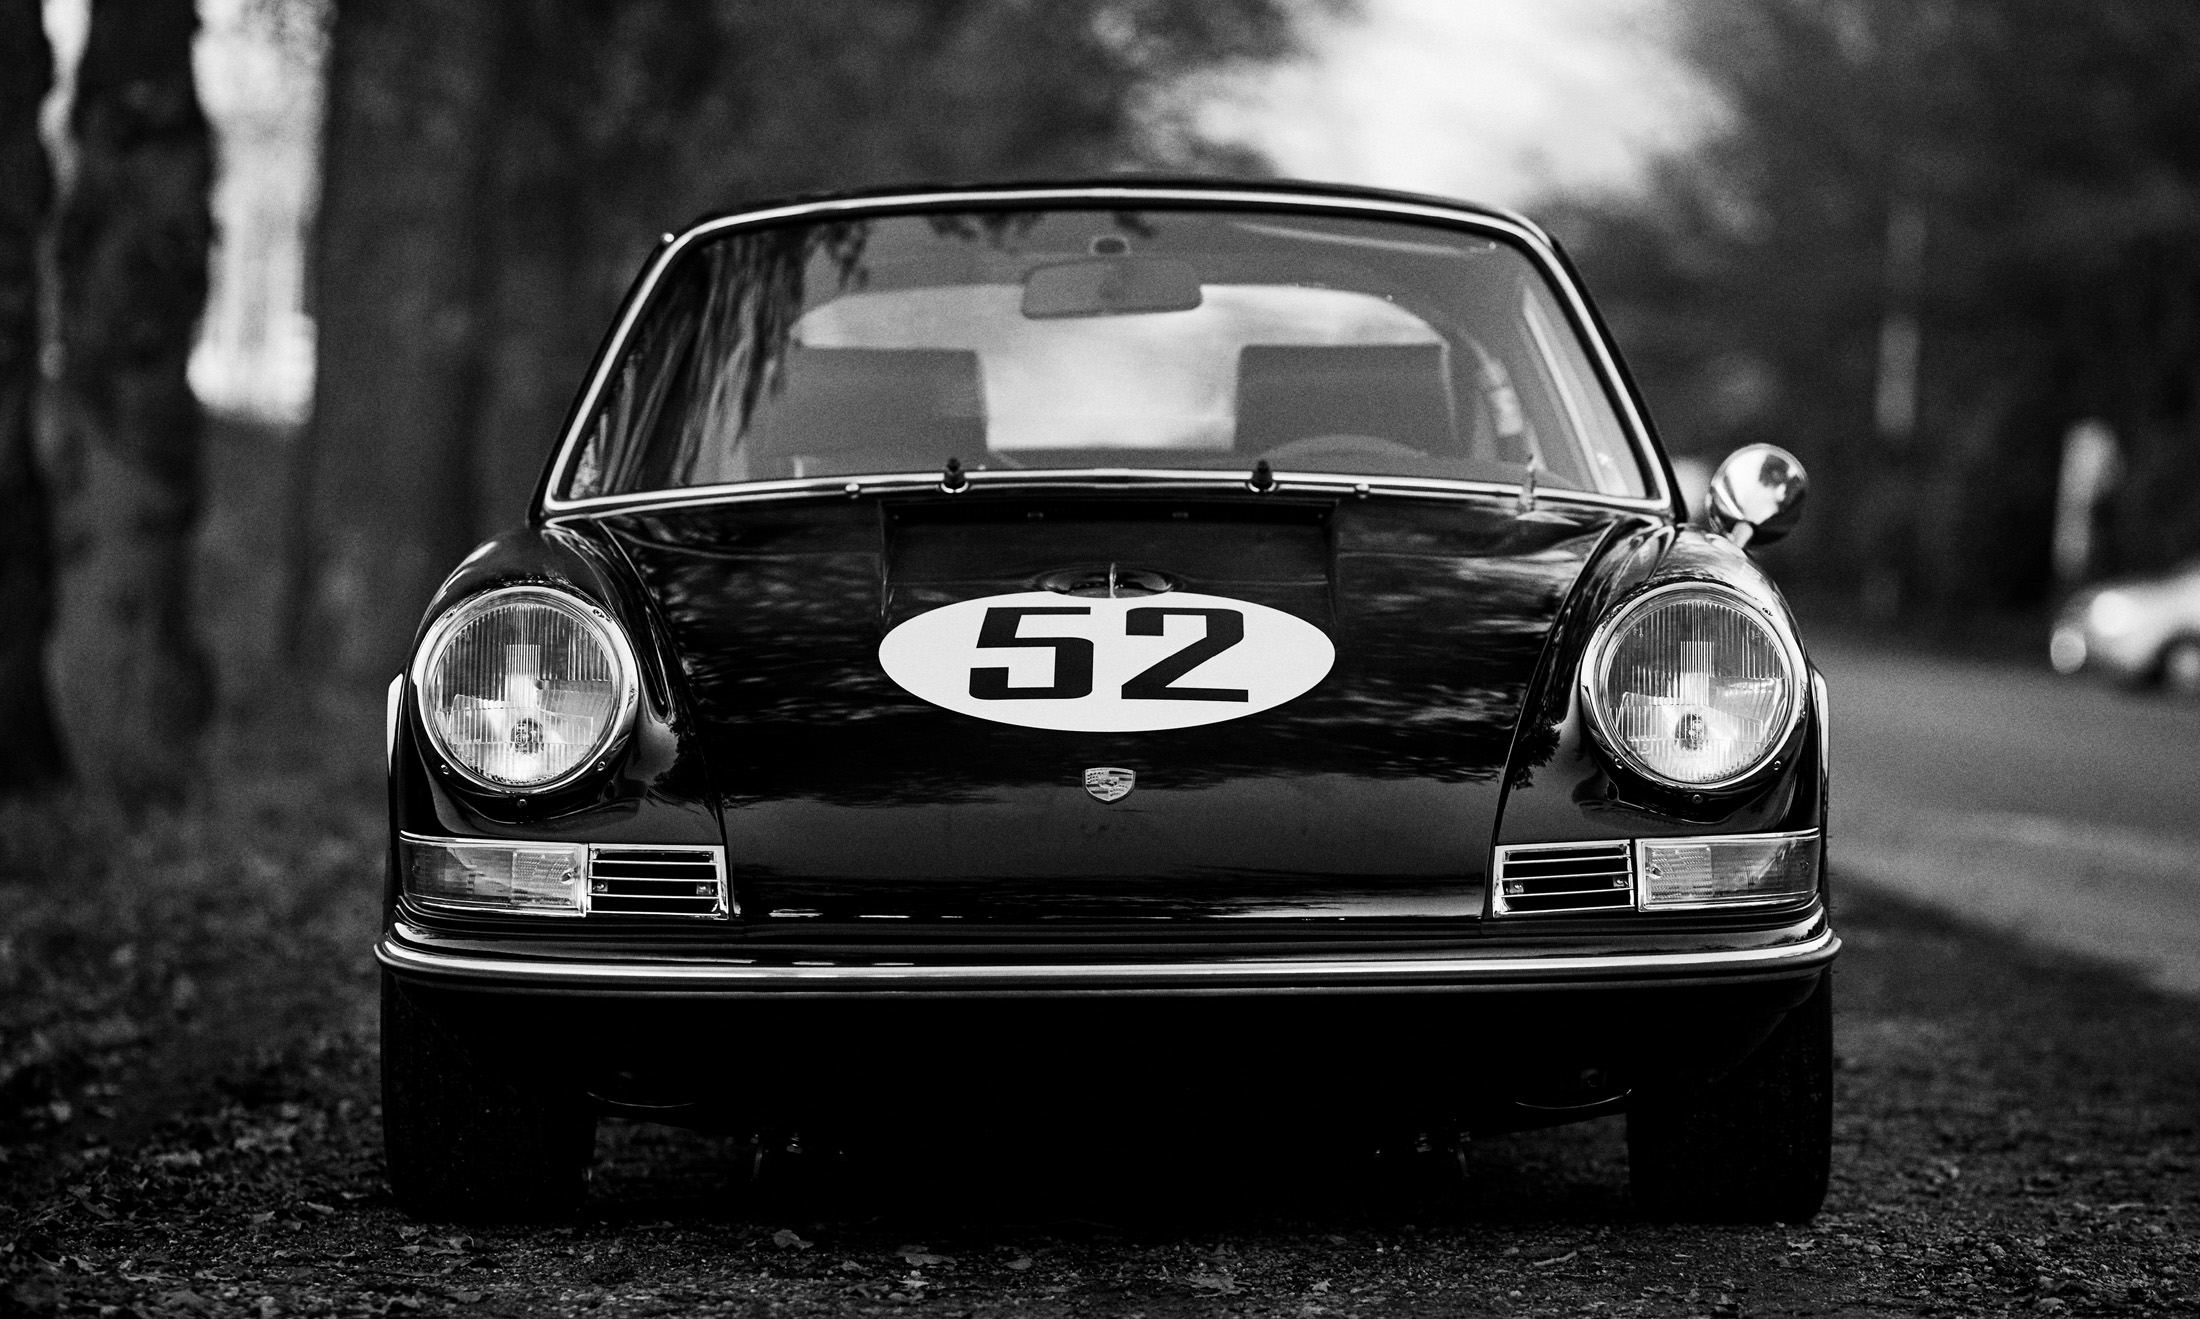 Flatsix Classics, located in Richmond, British Columbia, restores three to four vintage vehicles per year, including this 1970 Porsche 911T.